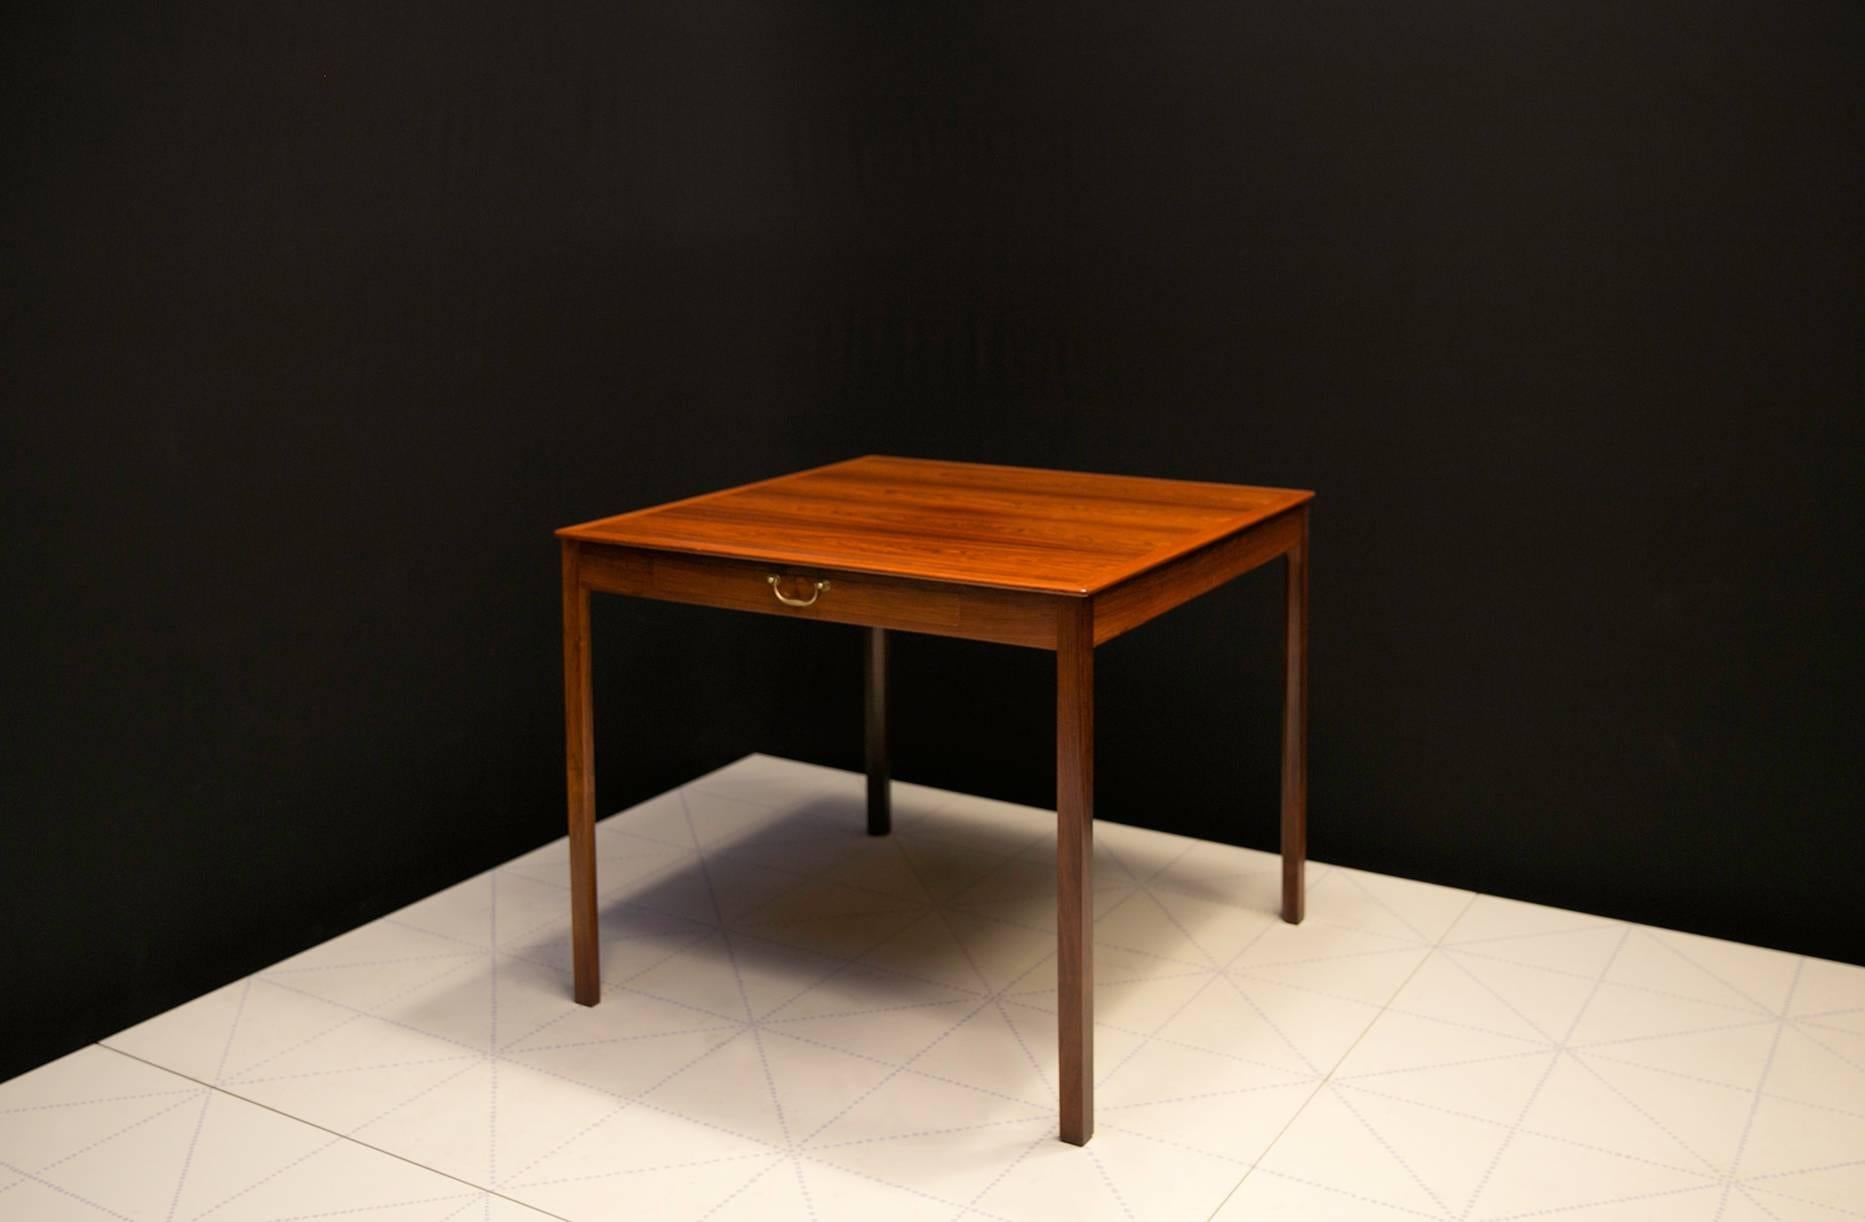 Ole Wanscher's Elegant and Refined Brazilian Rosewood Games Table with Drawer  In Excellent Condition For Sale In New York, NY